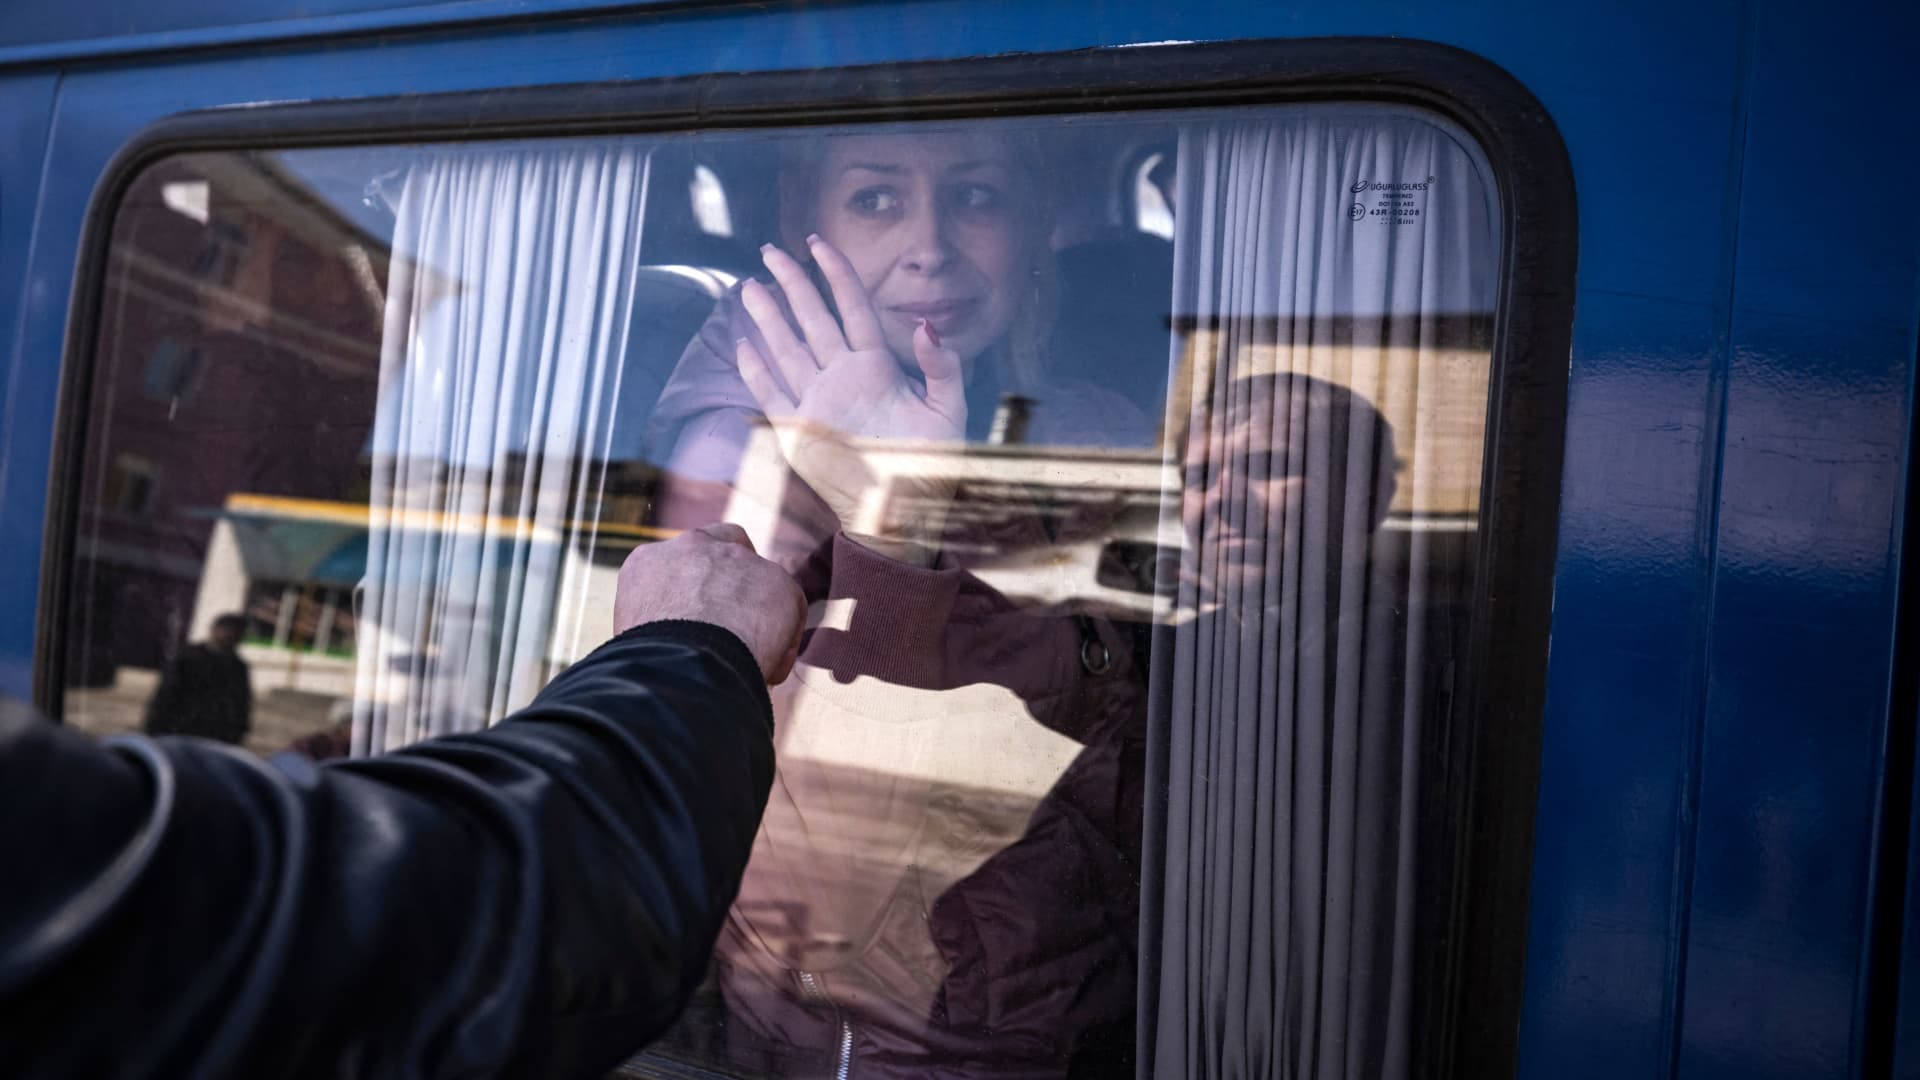 A woman waves to say good bye to her husband as she leaves on a bus, a day after a rocket attack at a train station in Kramatorsk, on April 9, 2022.